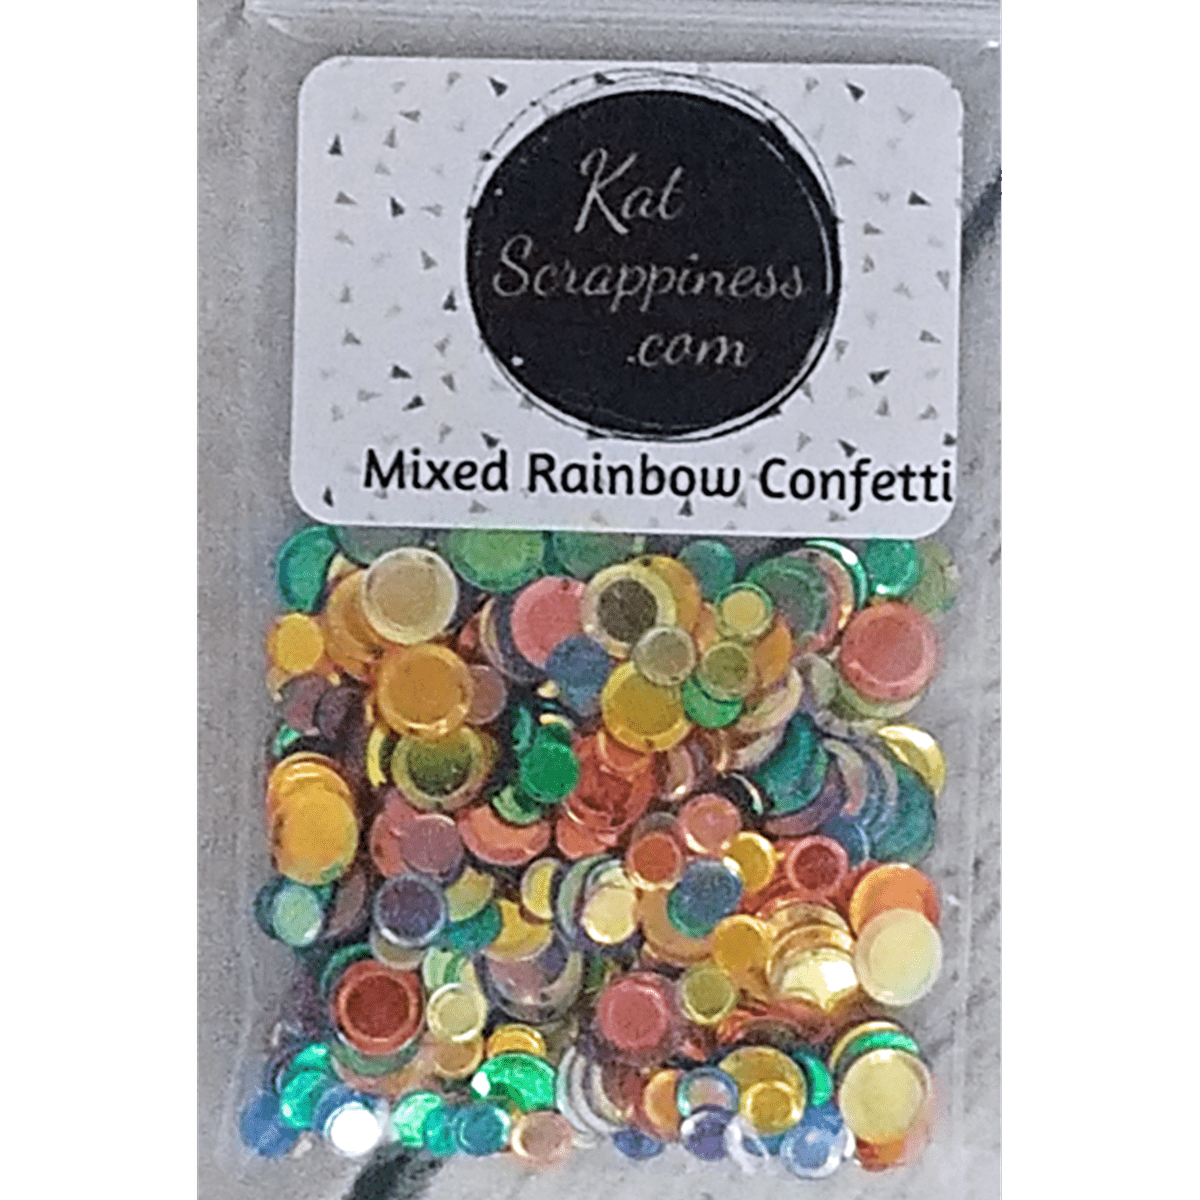 Mixed Rainbow Confetti Sequin Mix - Kat Scrappiness